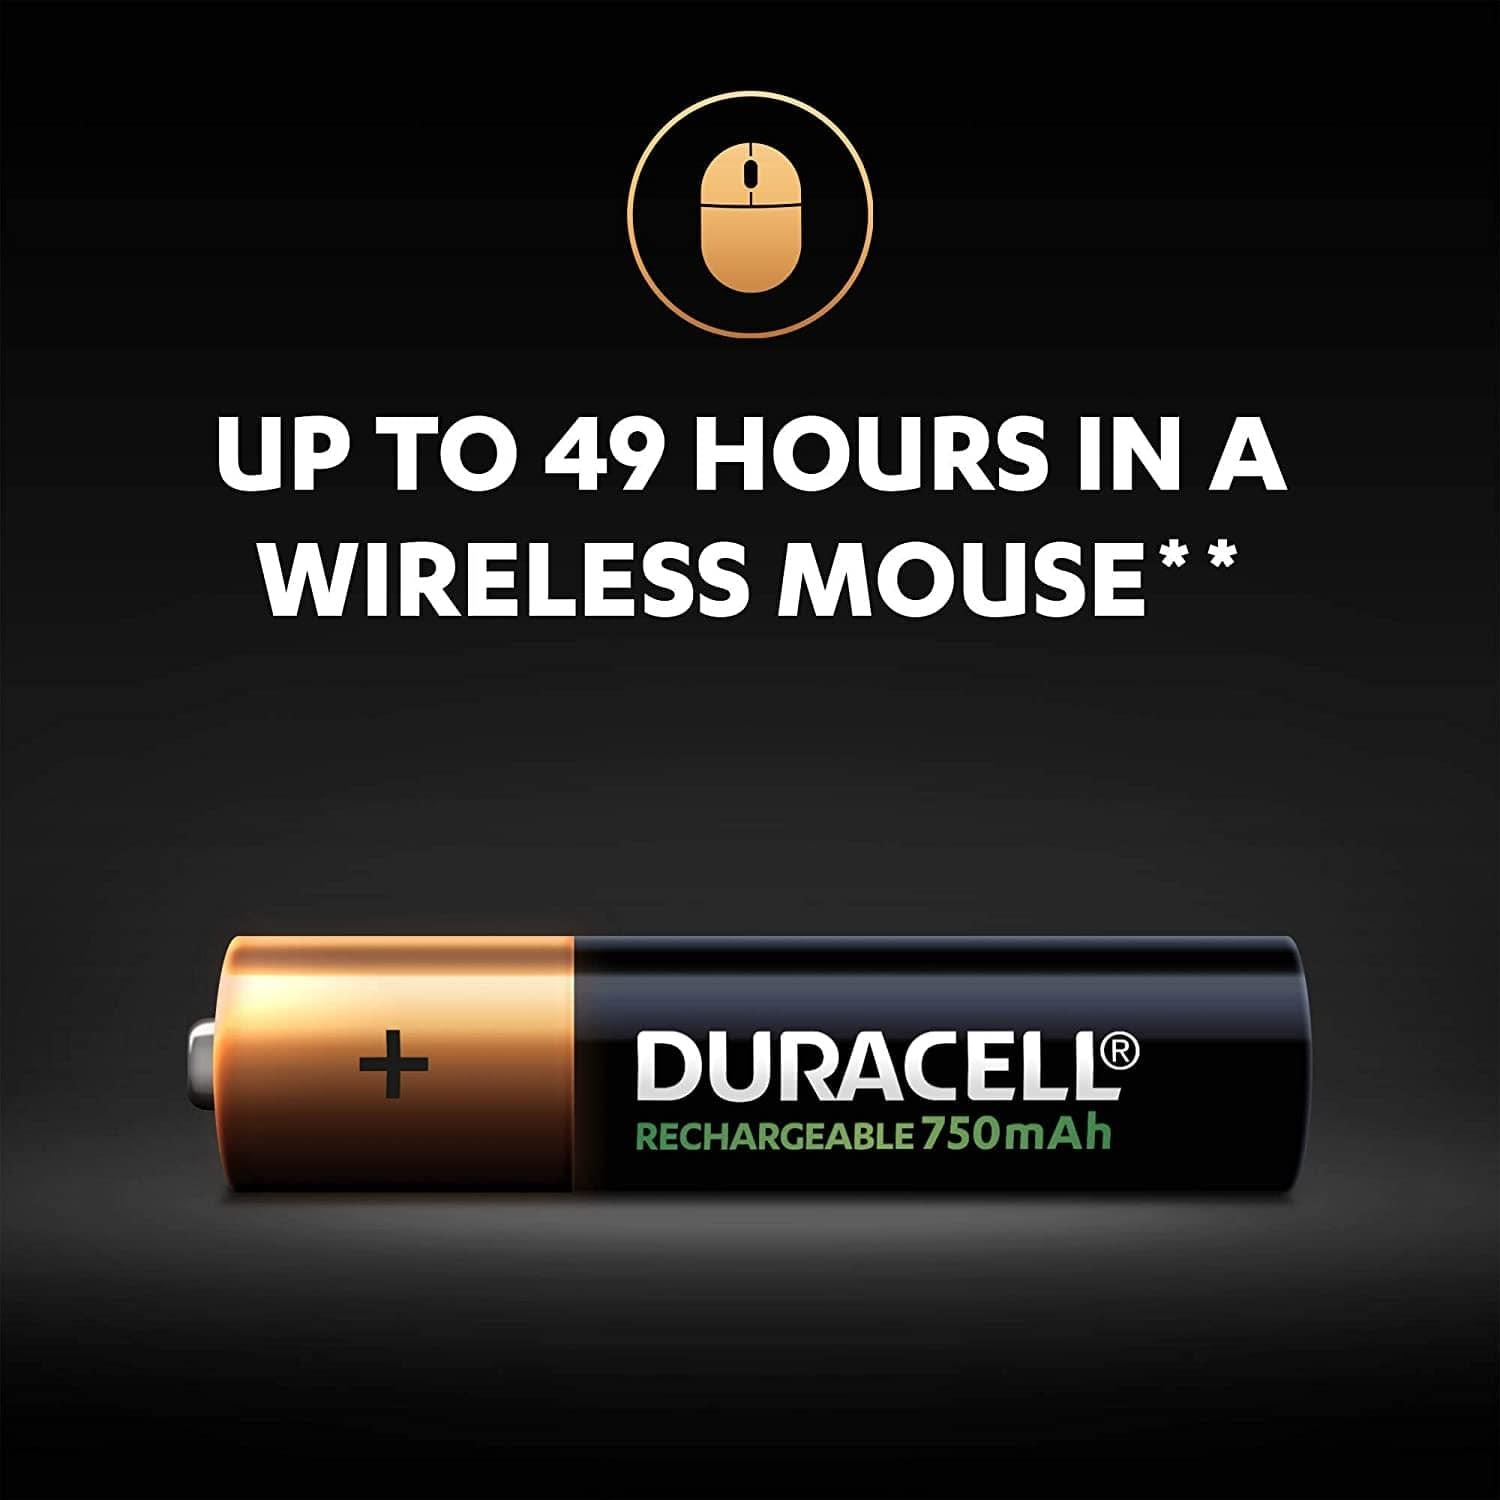 Duracell Rechargeable AA 1300mAh Batteries, Pack of 2-Batteries-dealsplant